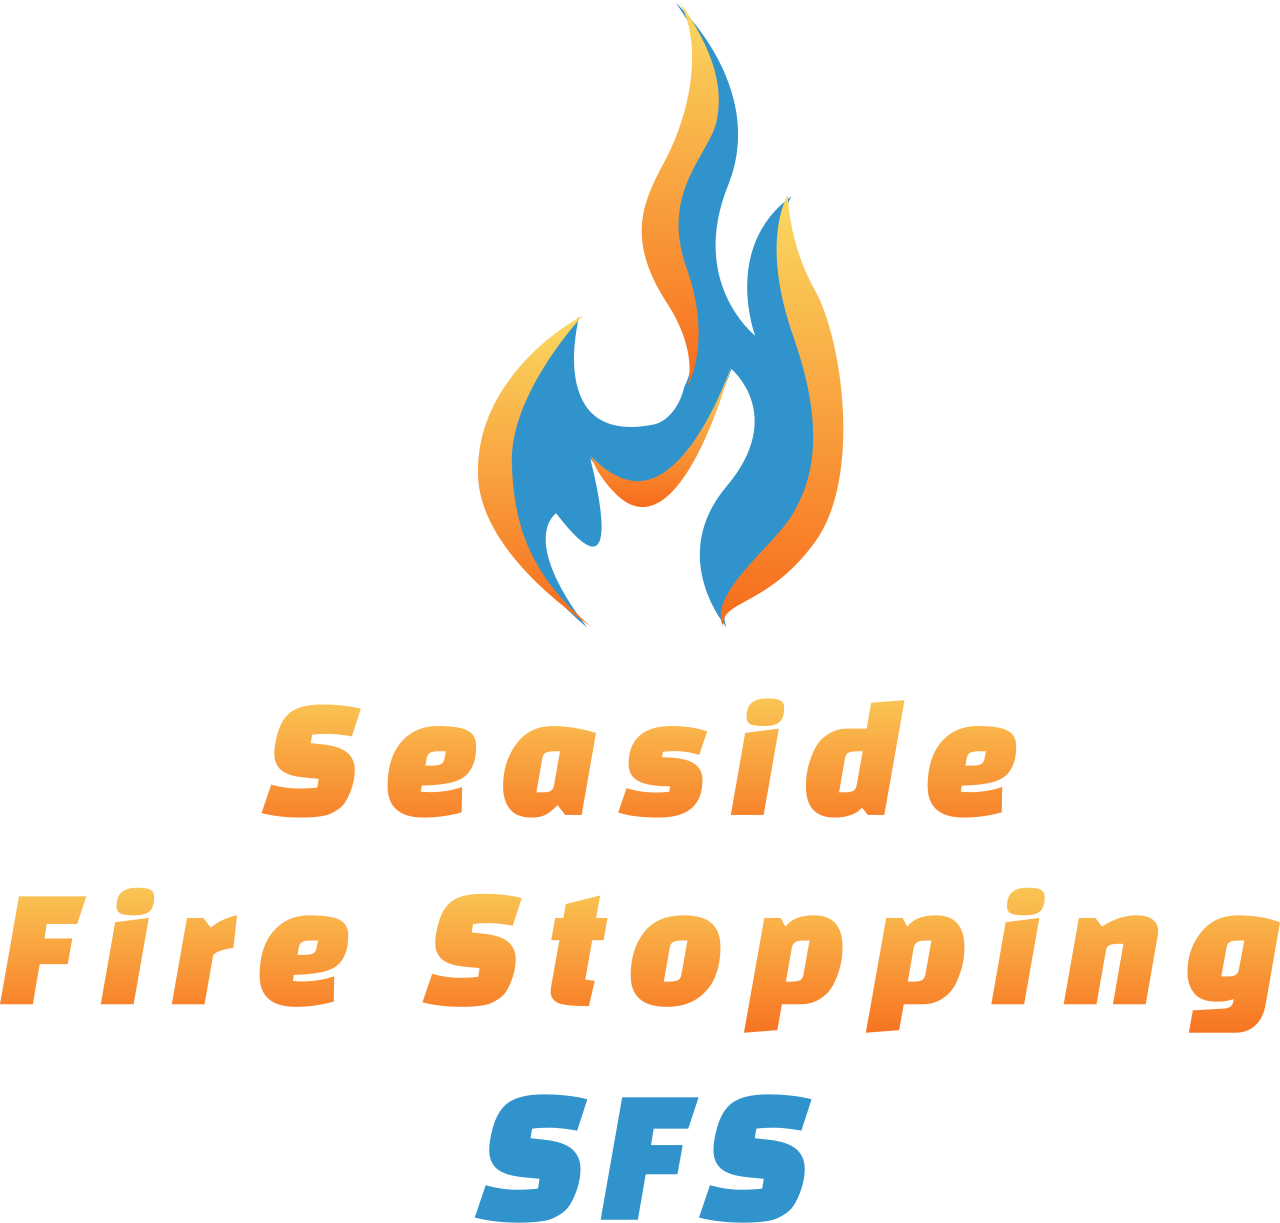 Seaside Fire Stopping's web page